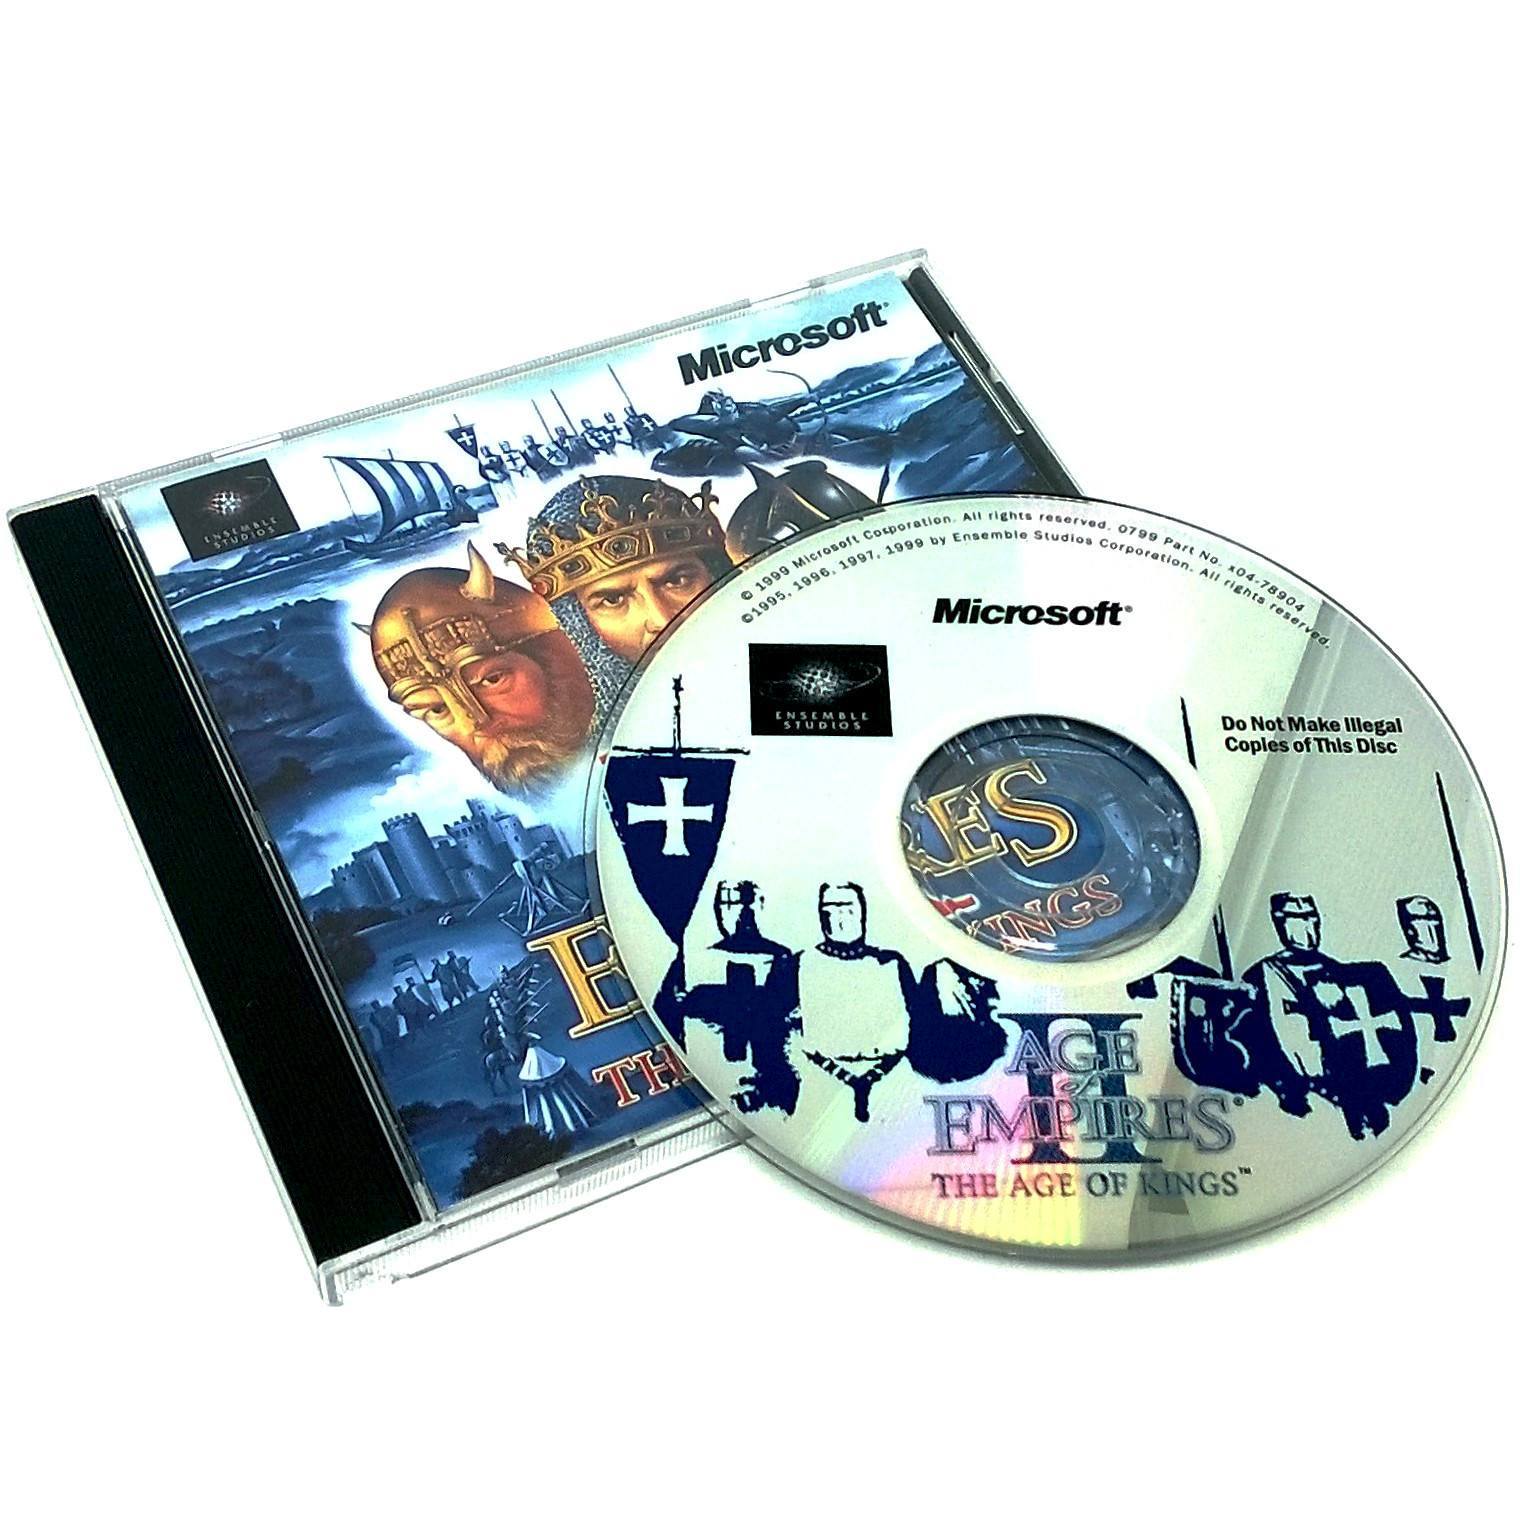 Age of Empires II: The Age of Kings for PC CD-ROM